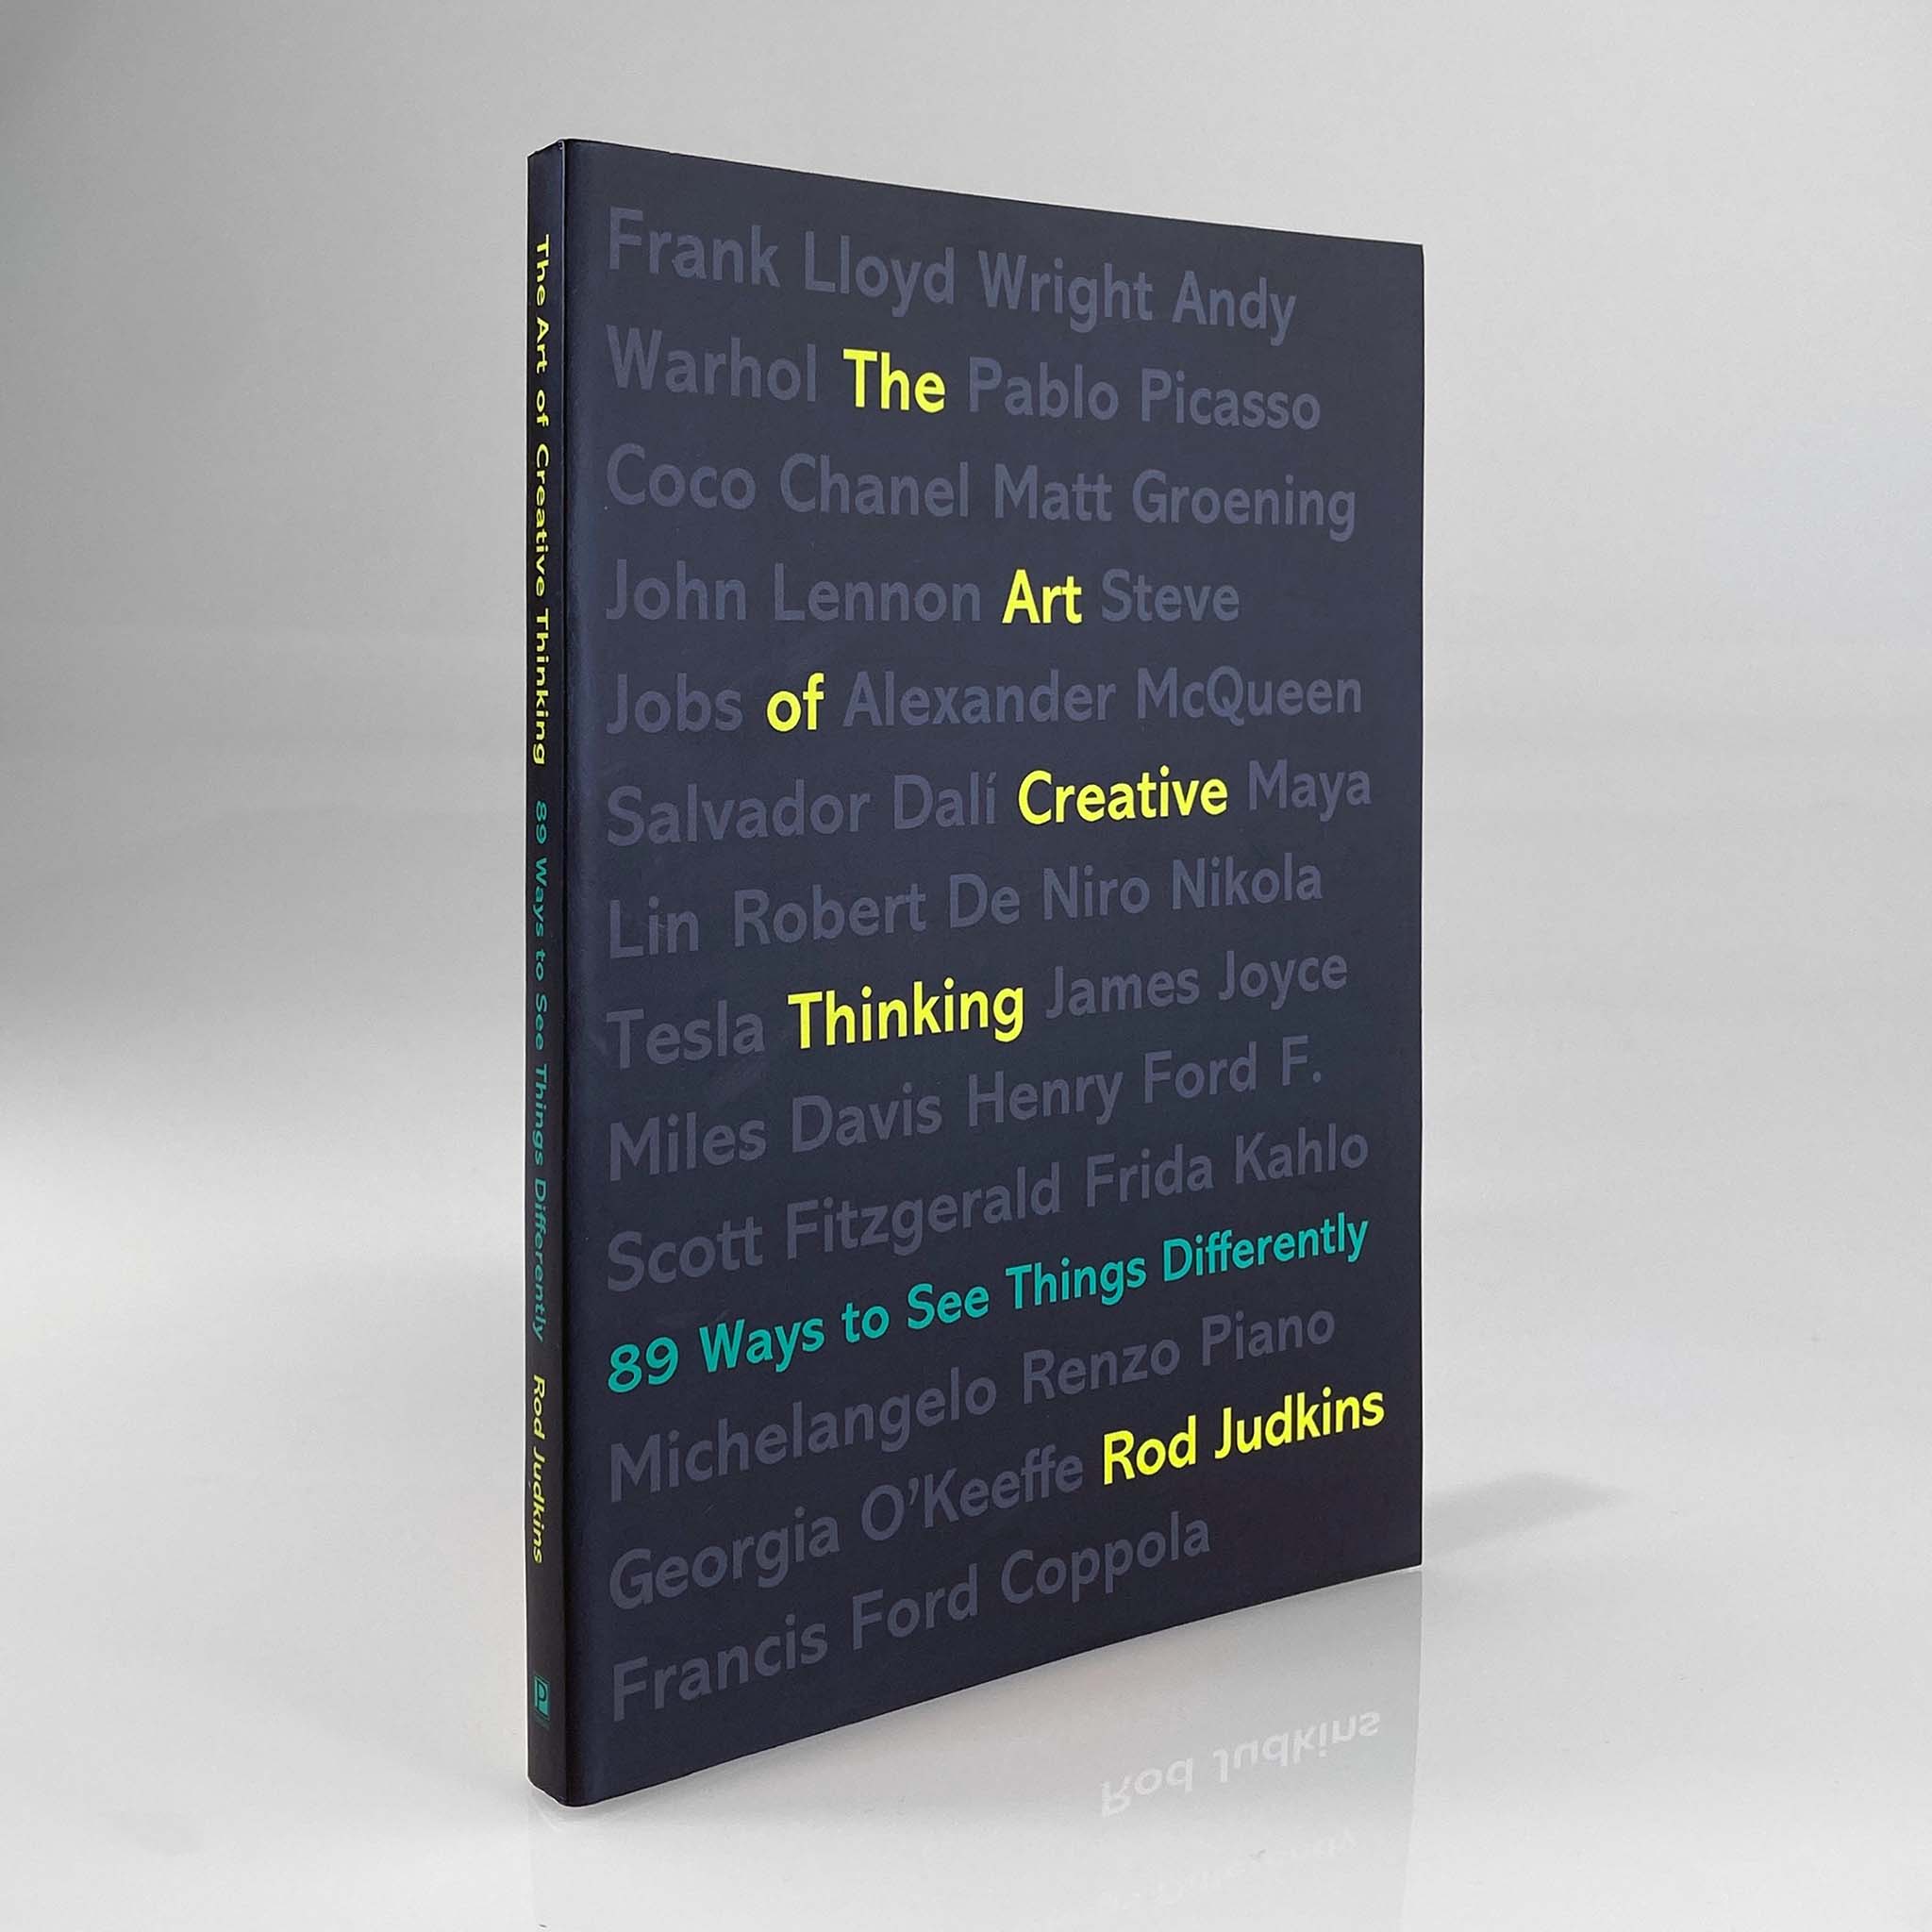 The Art of Creative Thinking: 89 Ways to See Things Differently